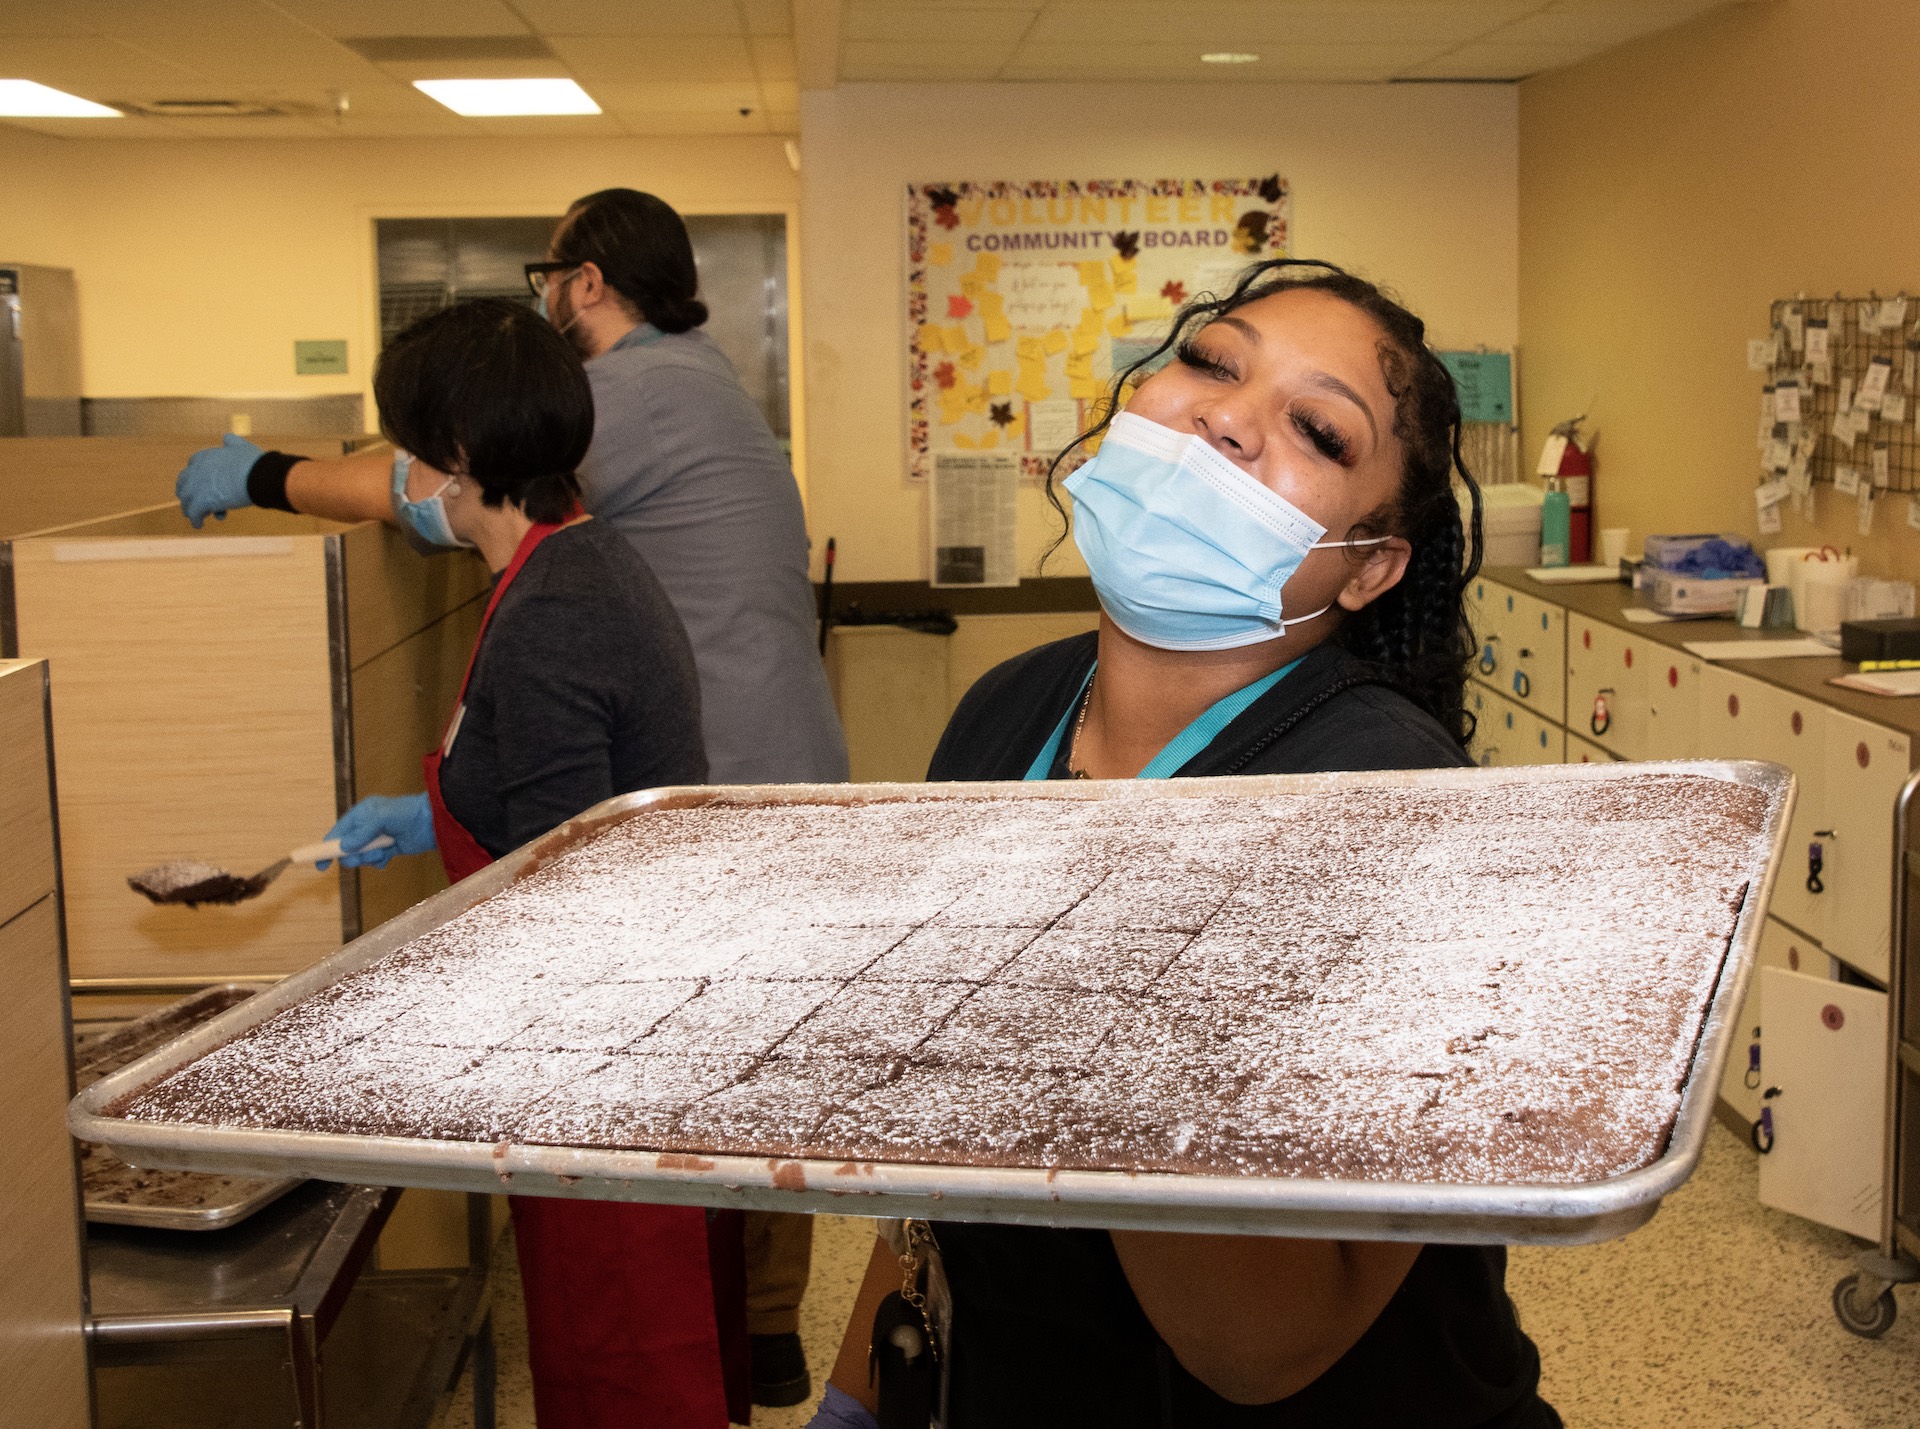 On Christmas, St. Anthony’s Will Serve 1,500 Meals in the Heart of the Tenderloin